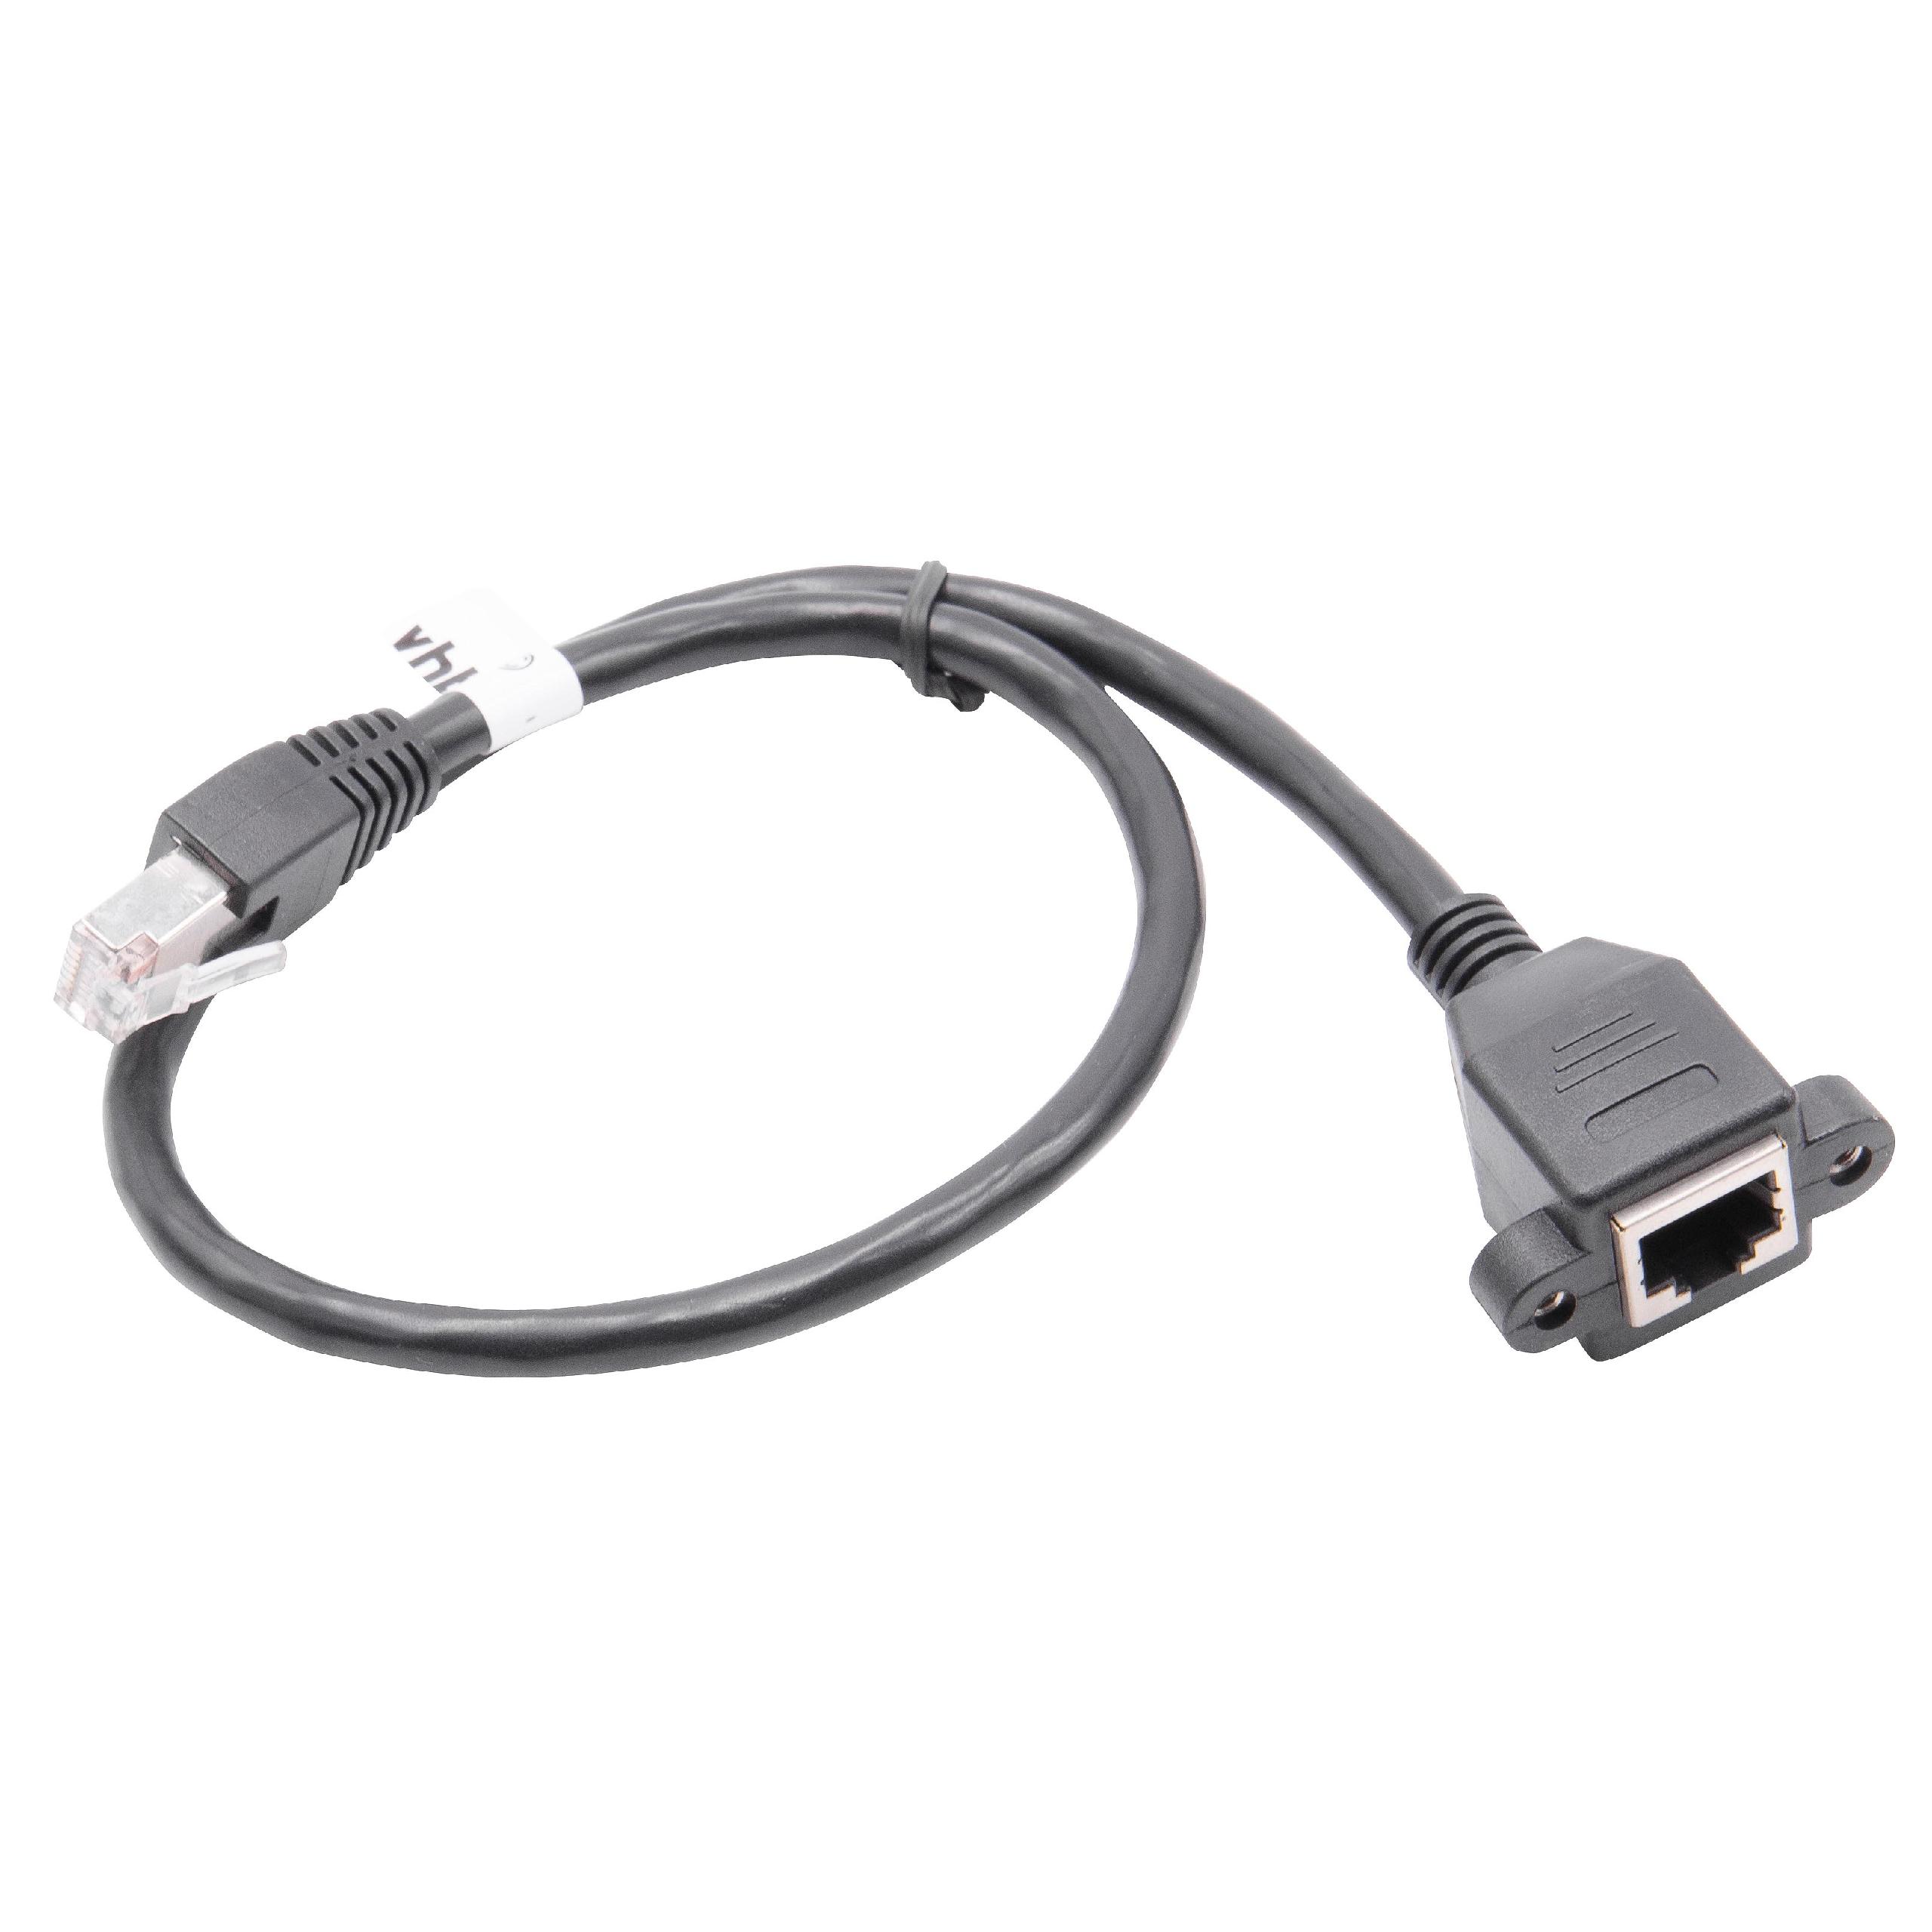 Cat6 Extension Cable RJ45 Plug to RJ45 Socket - Ethernet LAN Cable with RJ45 Built-In Socket, 0.5 m